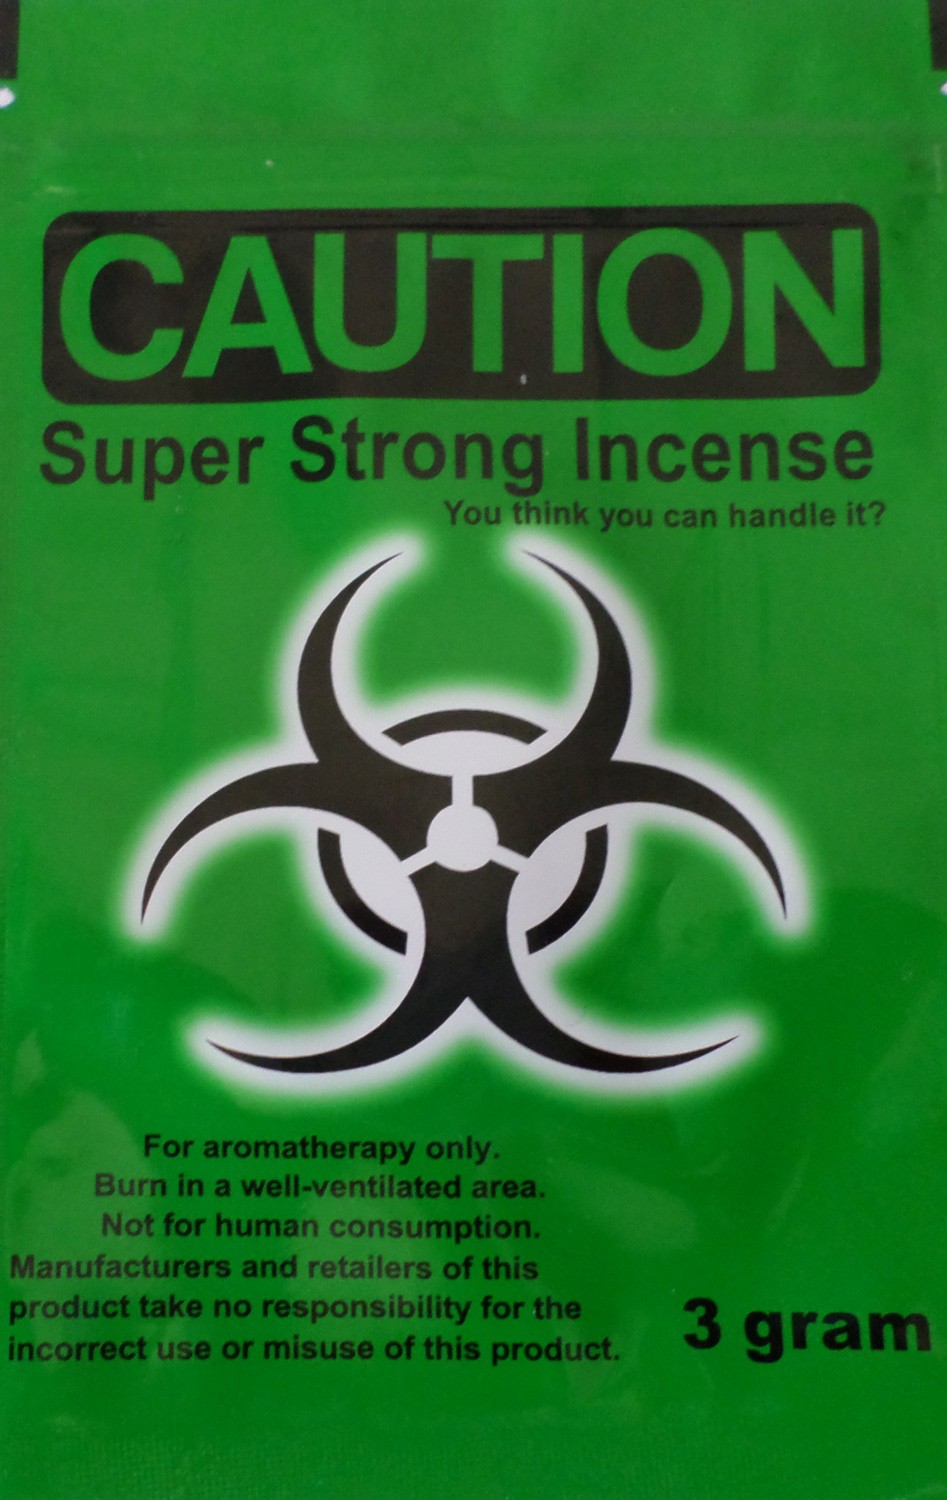 Caution green label incense 3g